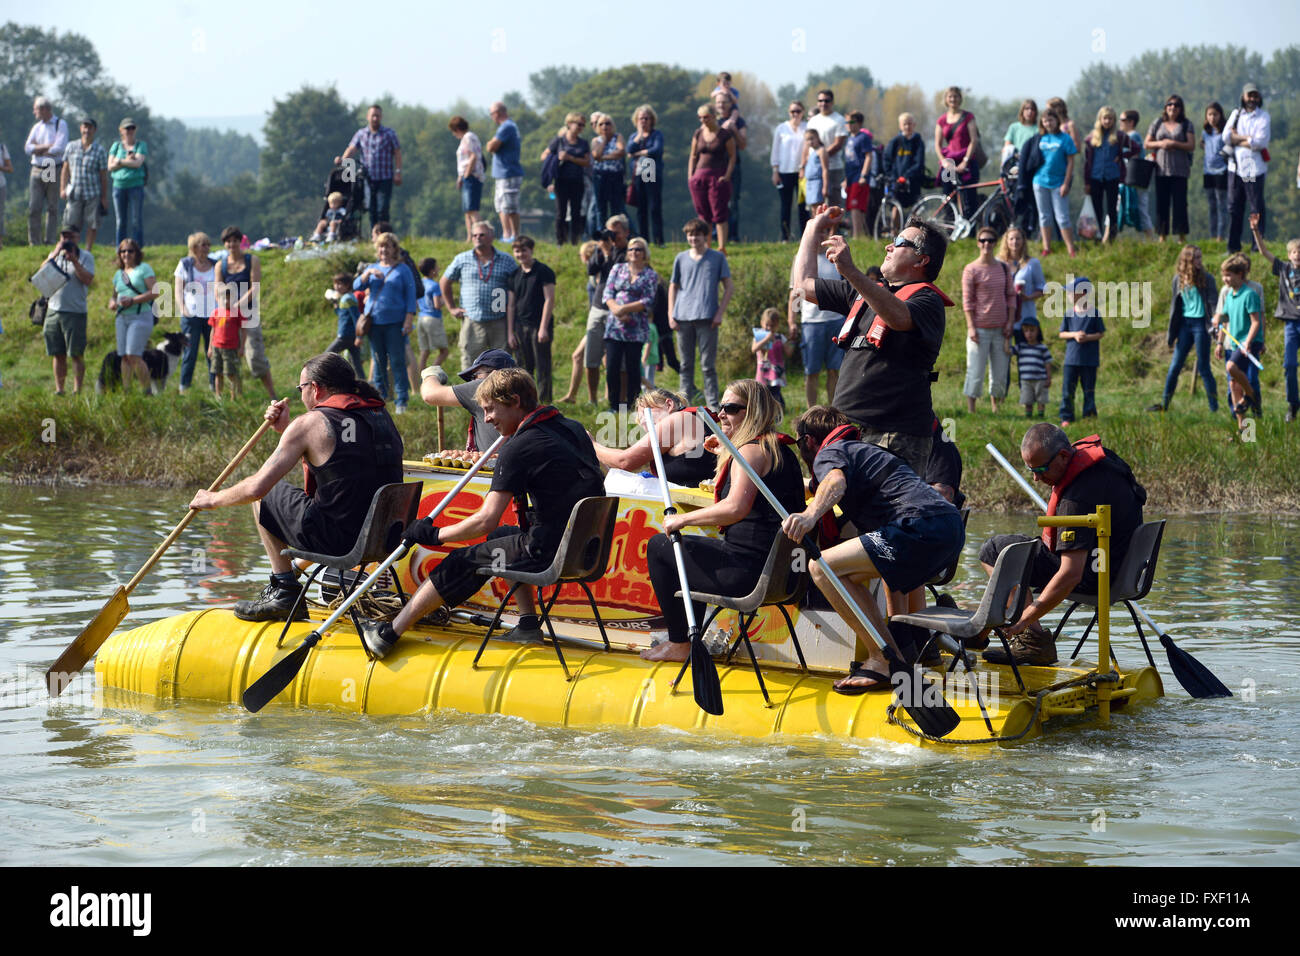 Lewes to Newhaven, East Sussex, raft race on homebuilt rafts. Stock Photo